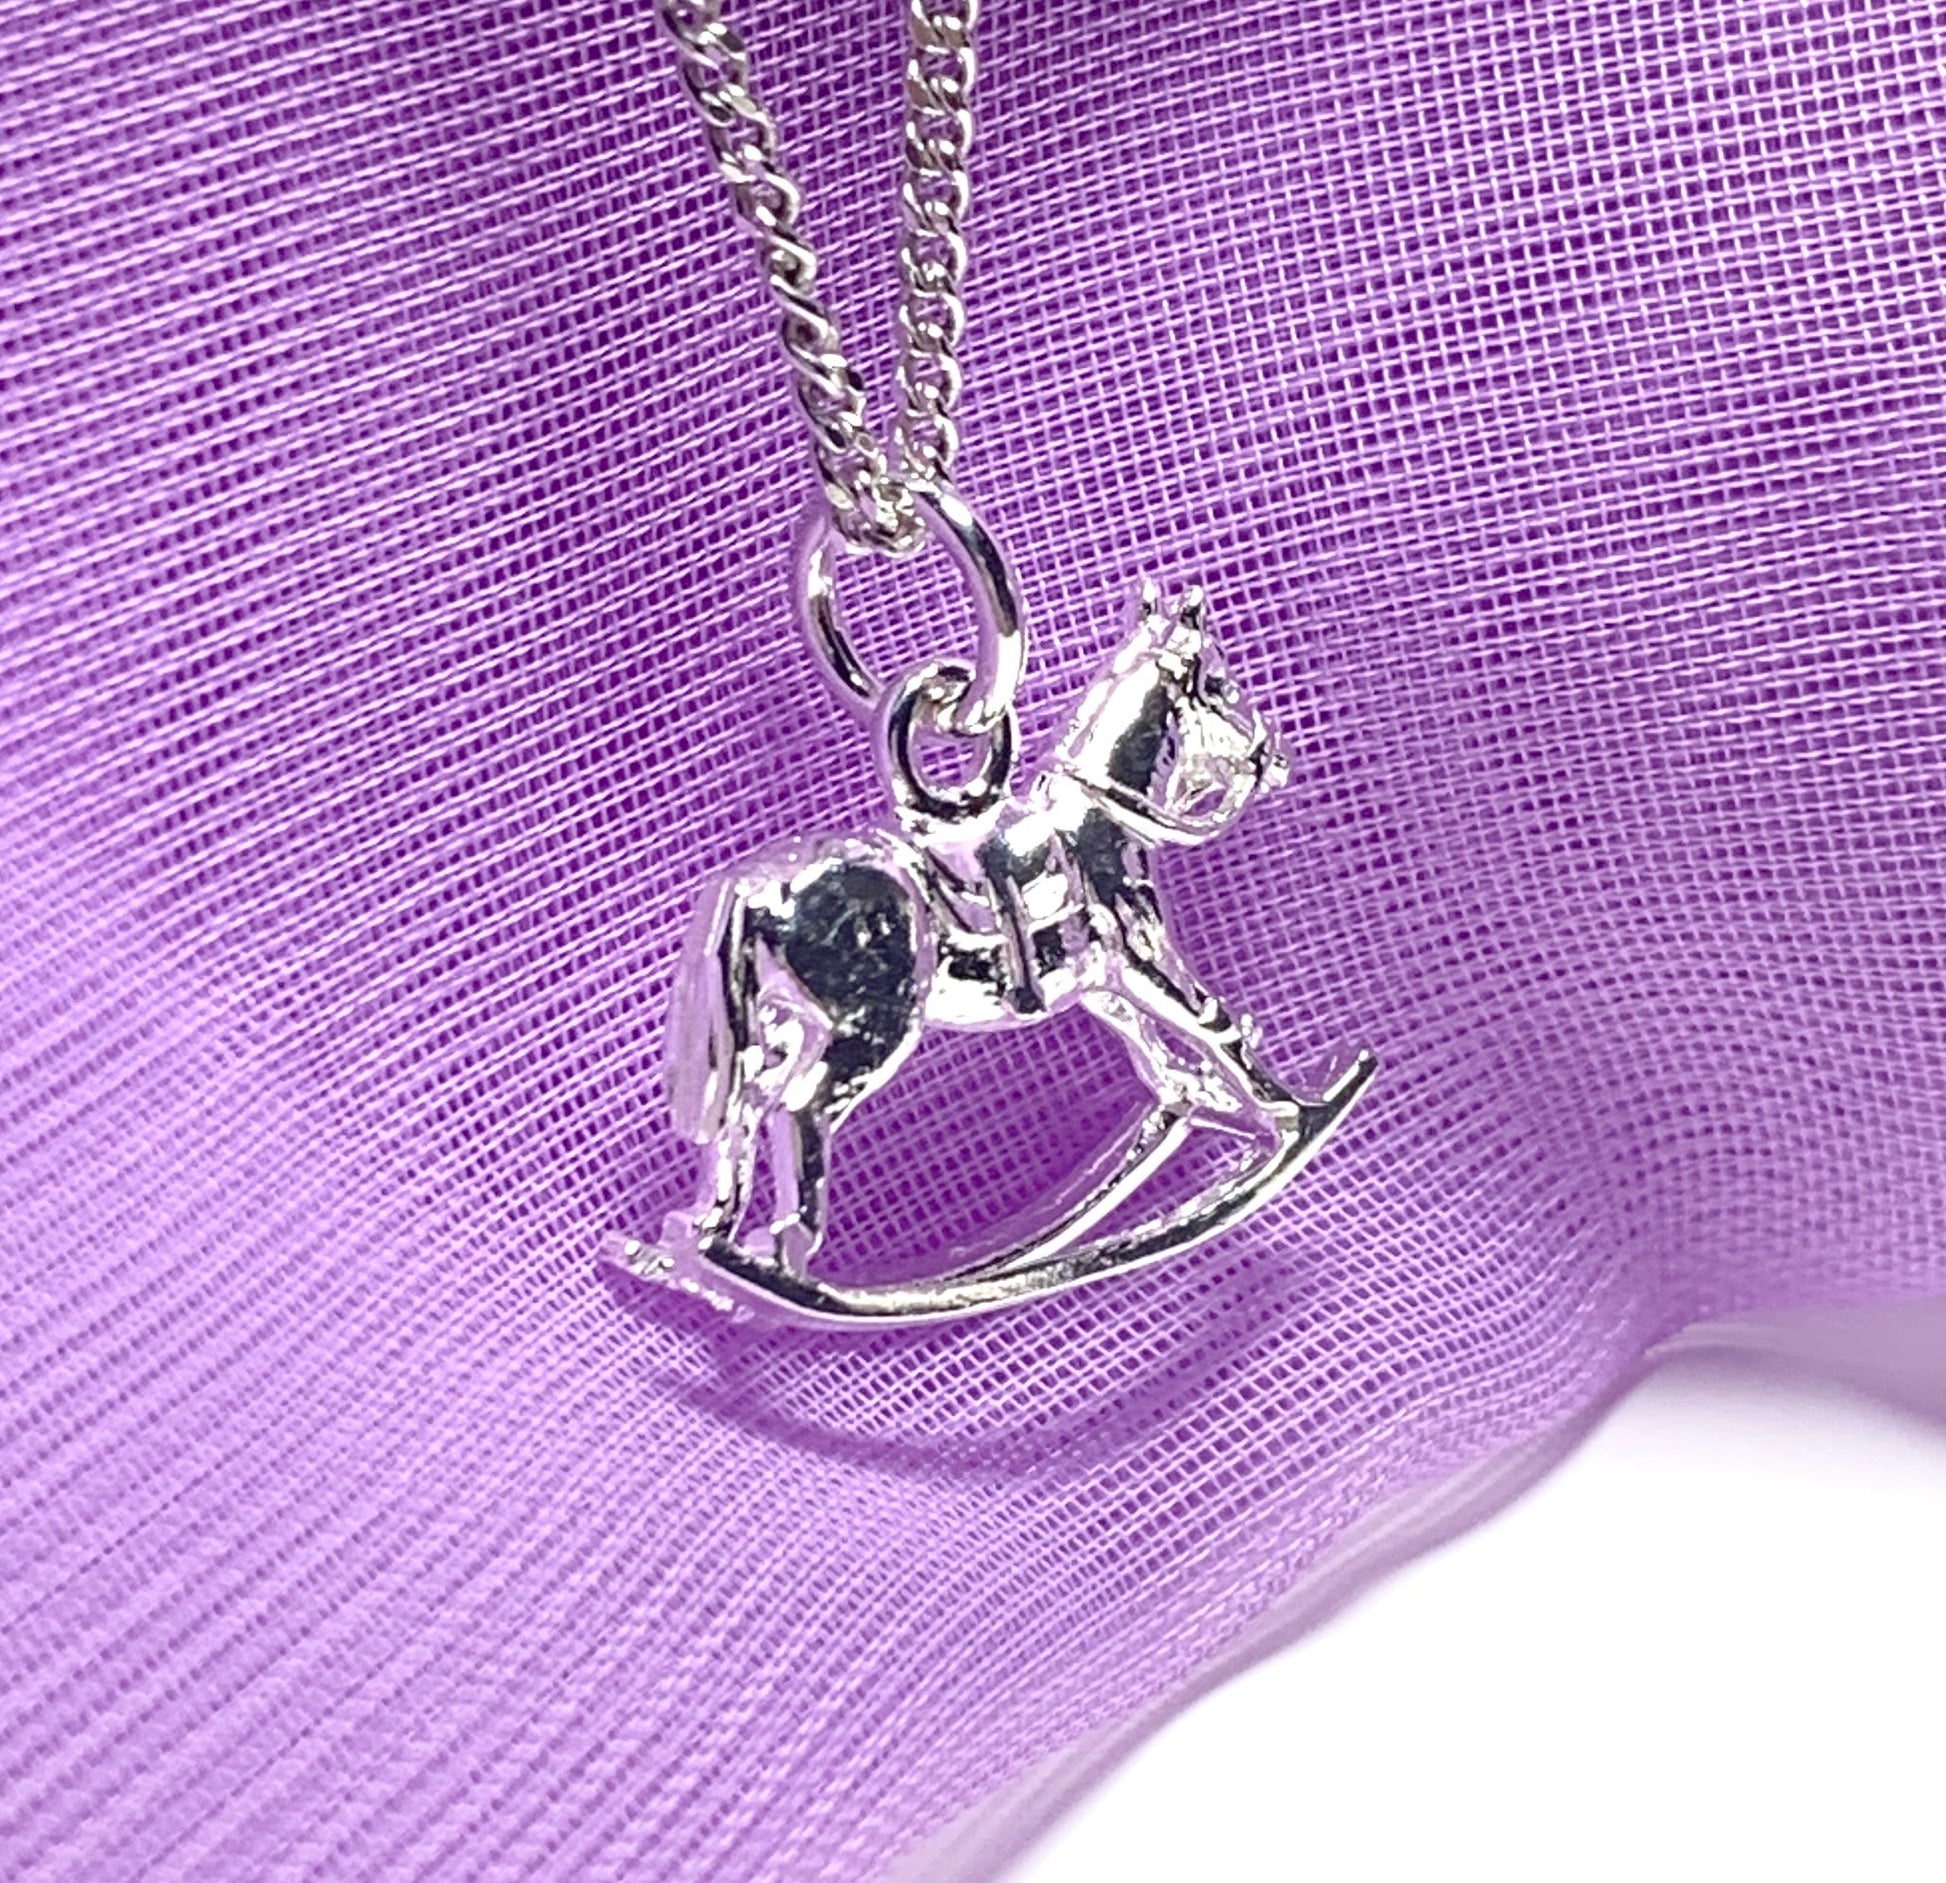 Rocking horse necklace sterling silver